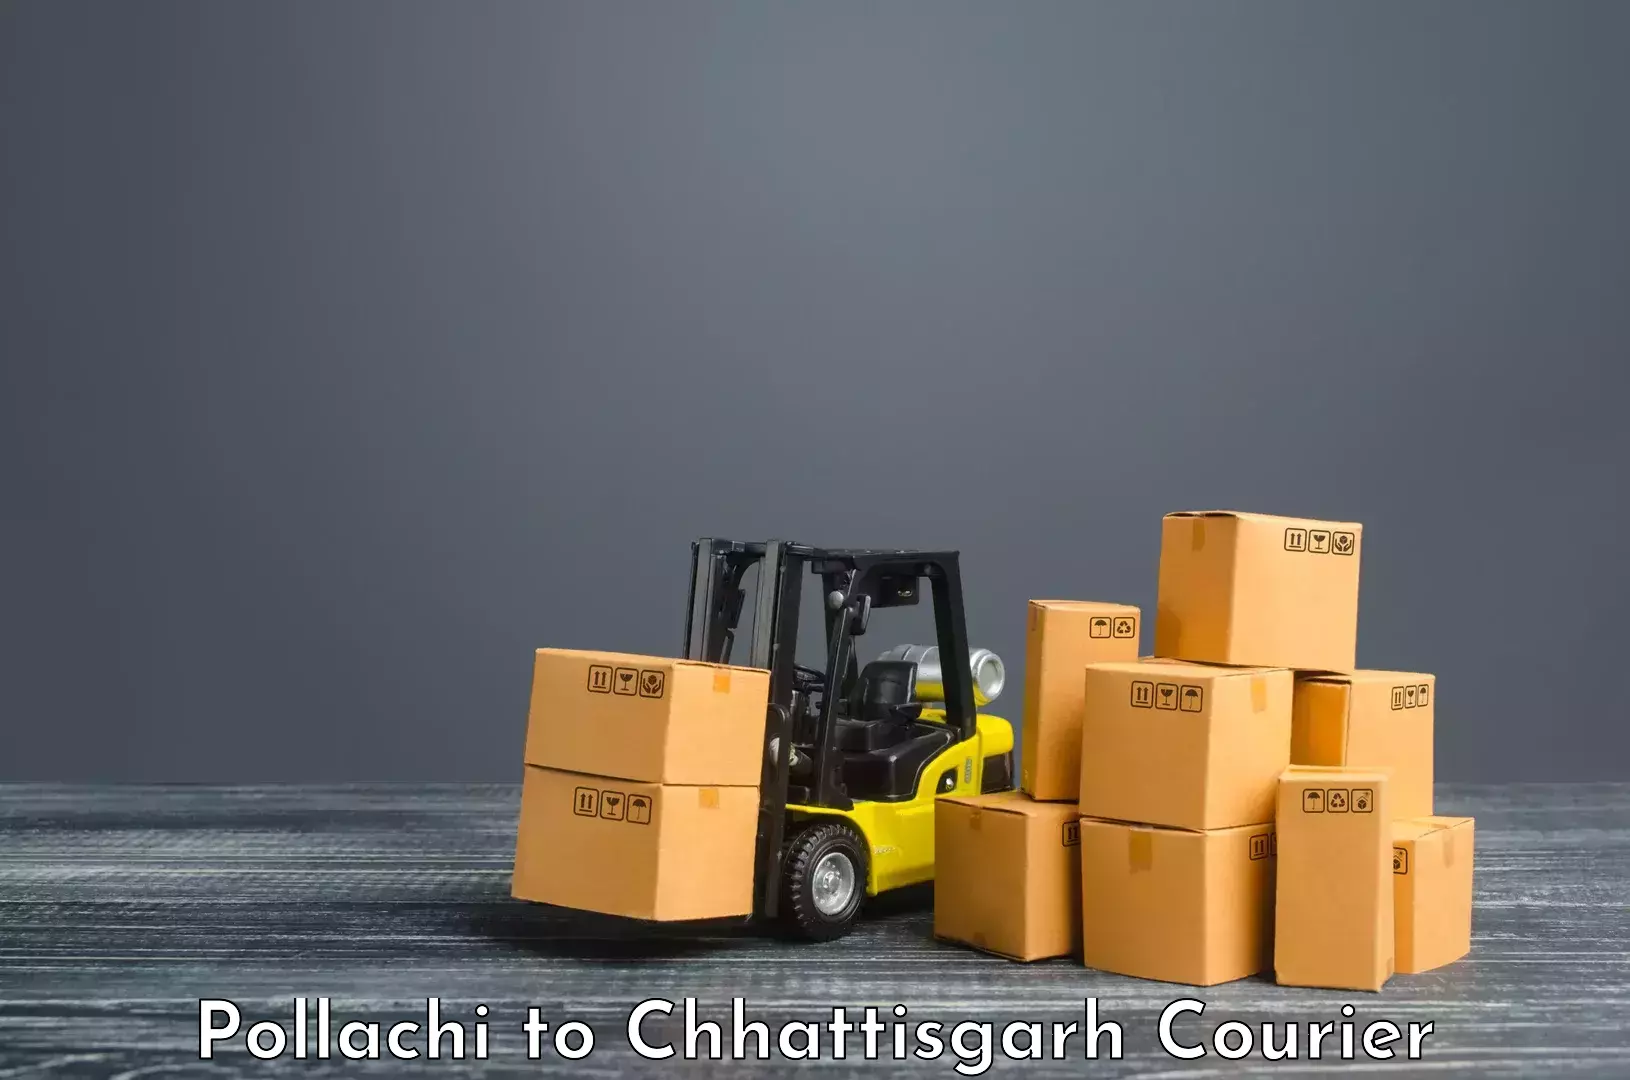 Express logistics in Pollachi to Raigarh